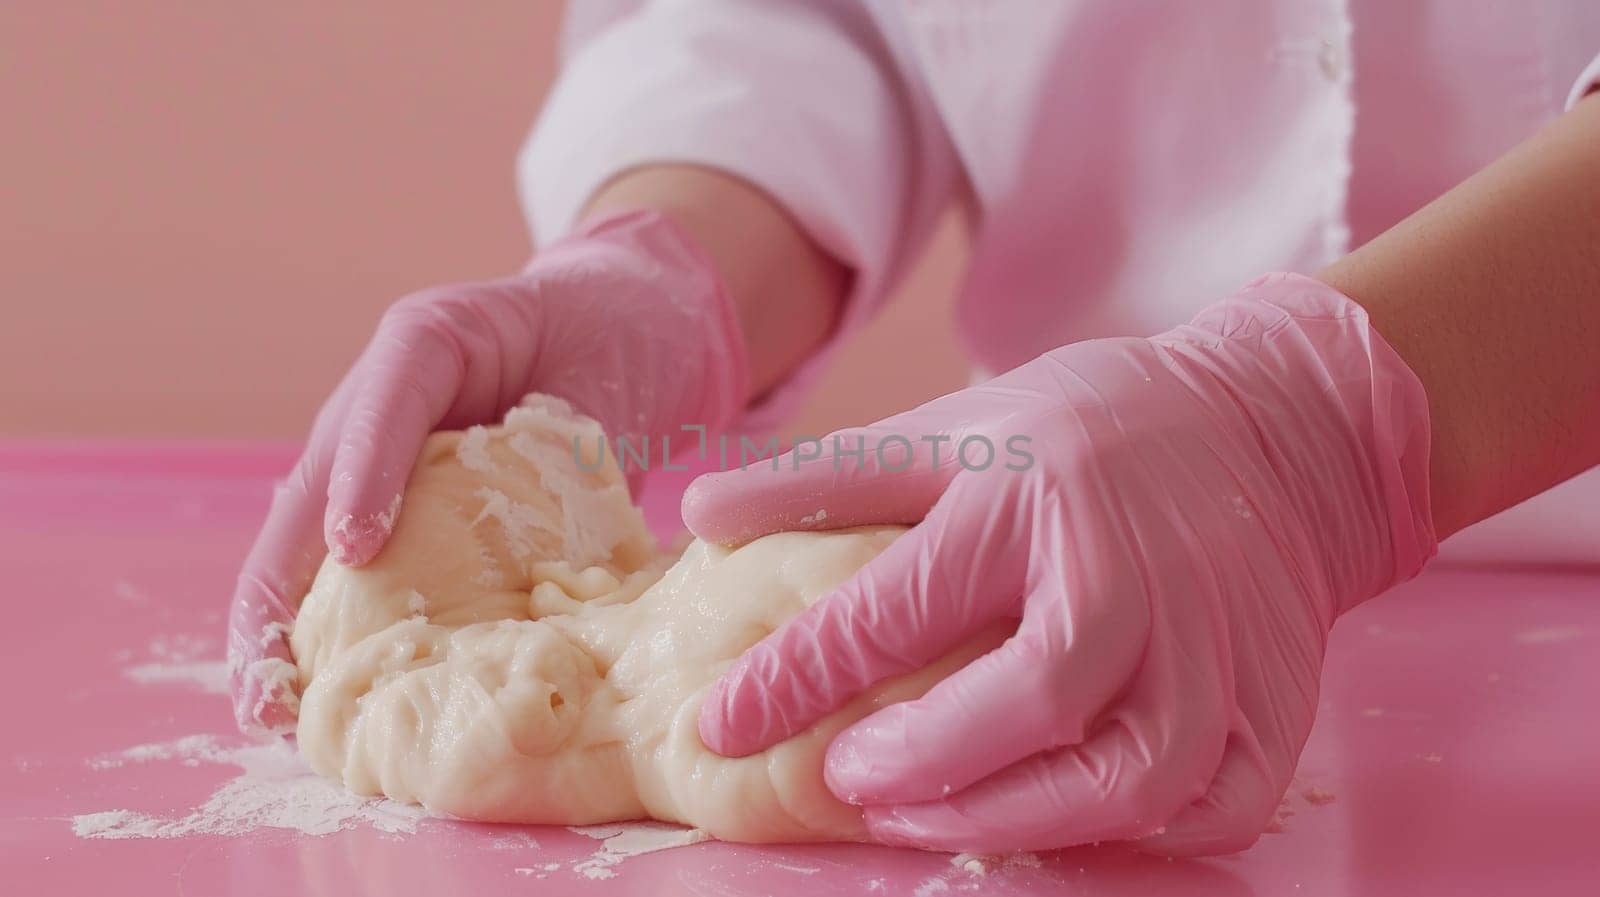 A person in pink gloves kneading dough on a table